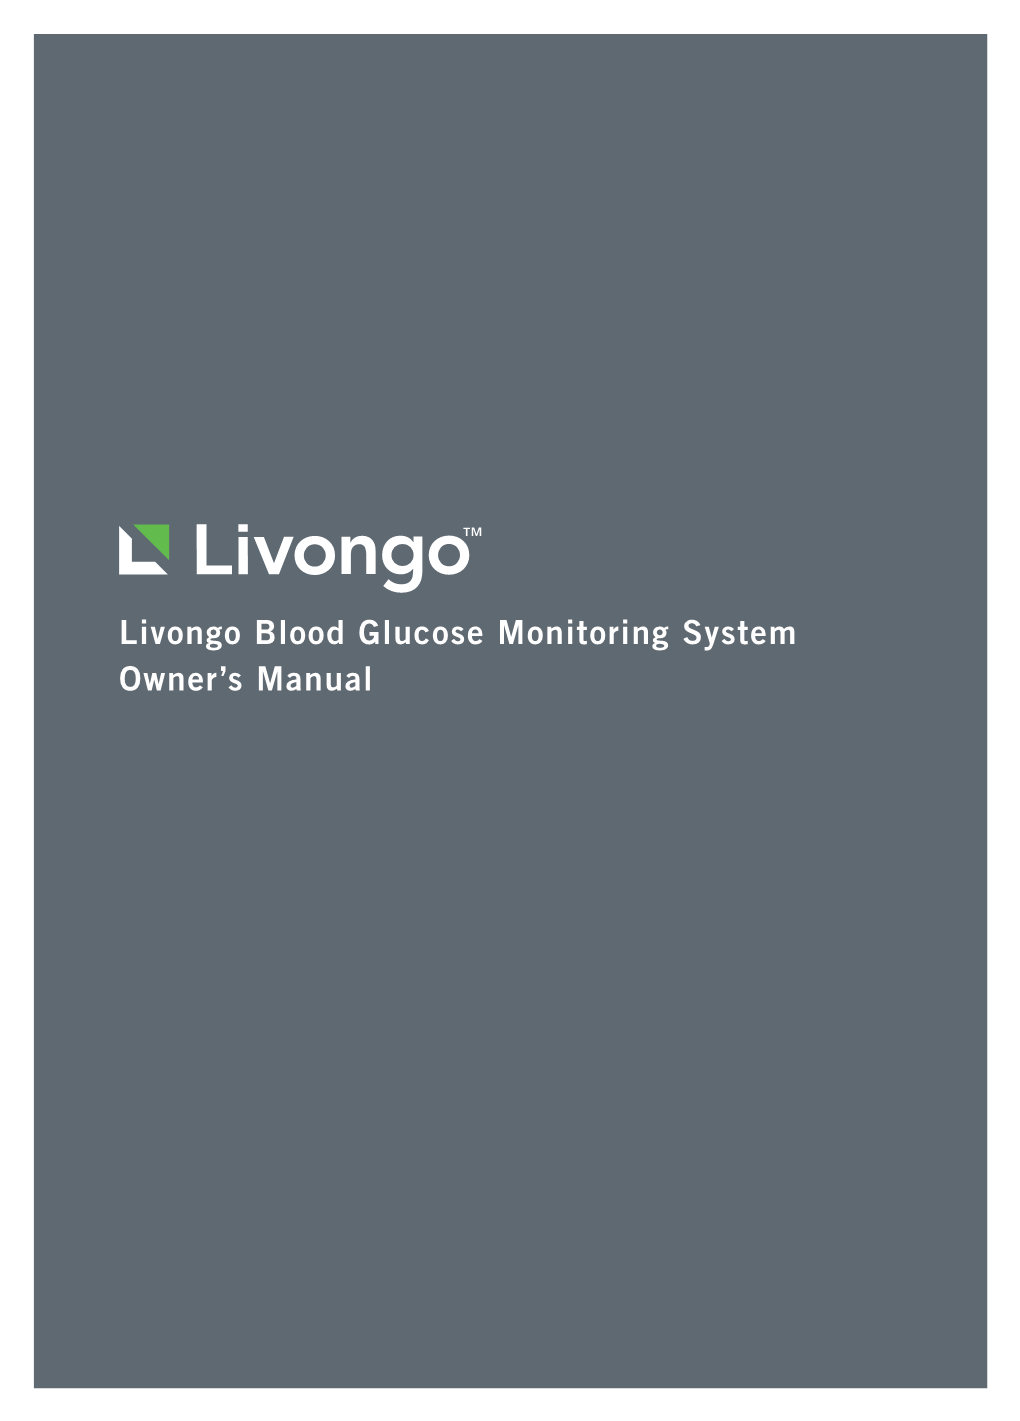 Livongo Blood Glucose Monitoring System Owner's Manual